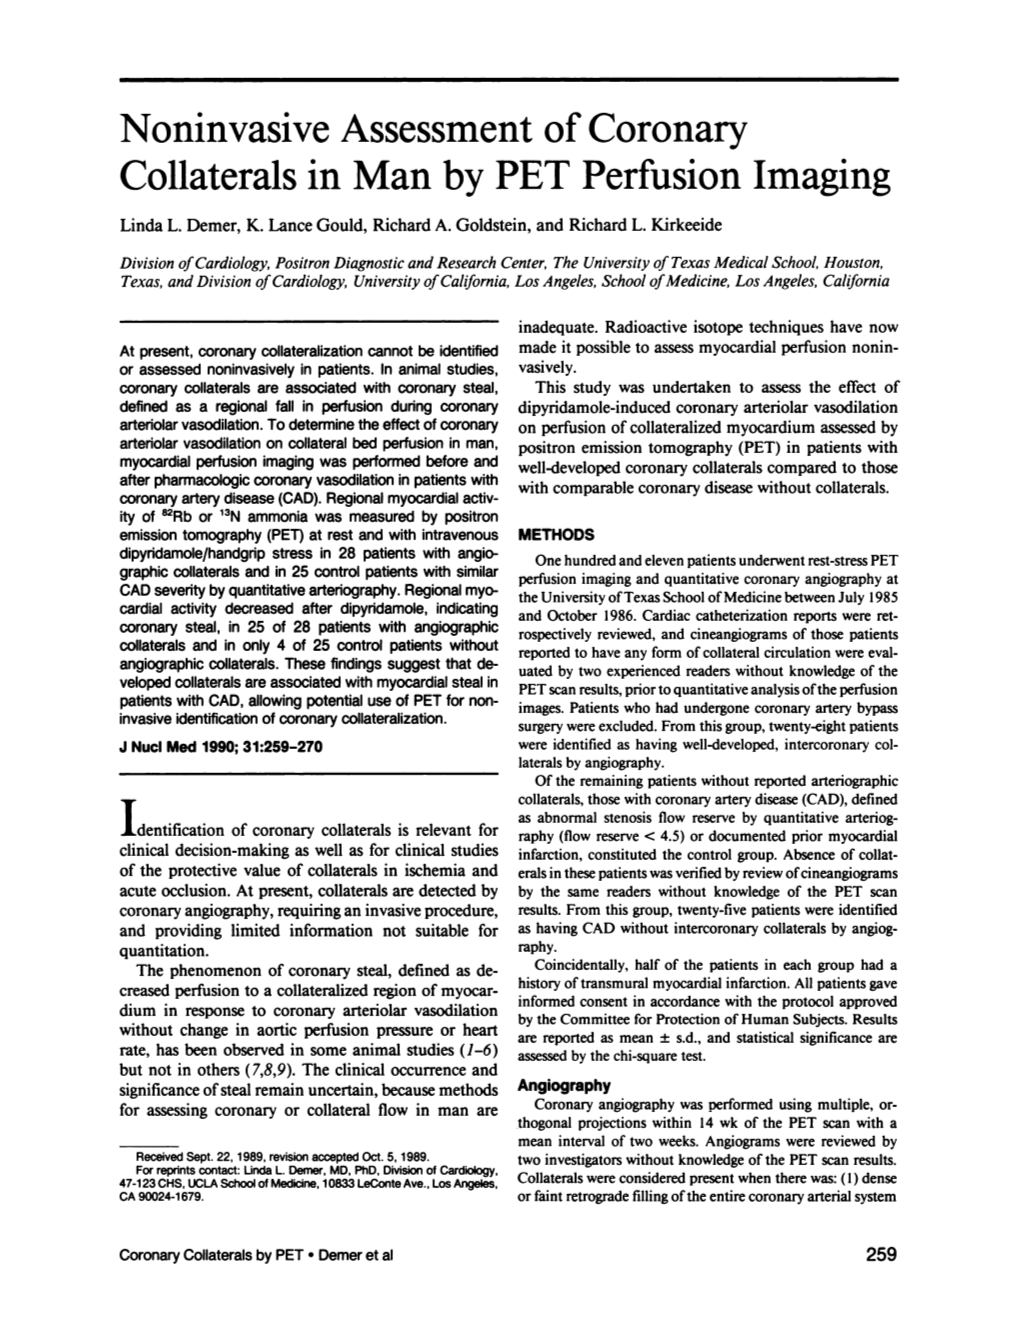 Noninvasive Assessment of Coronary Collaterals in Man by PET Perfusion Imaging